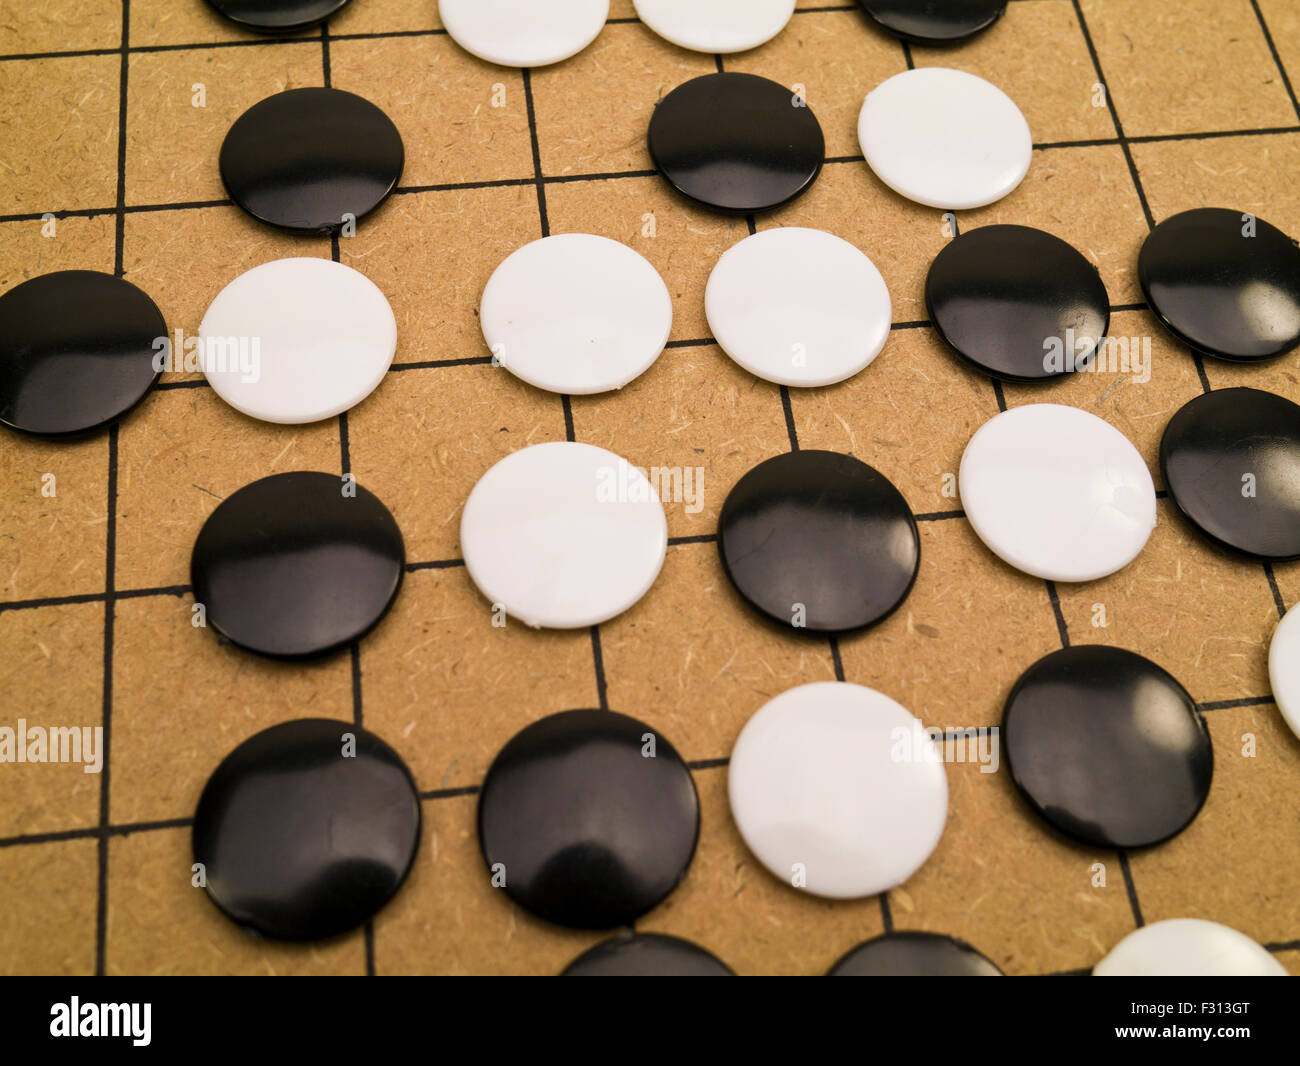 closeup view of stones on a Go board Stock Photo